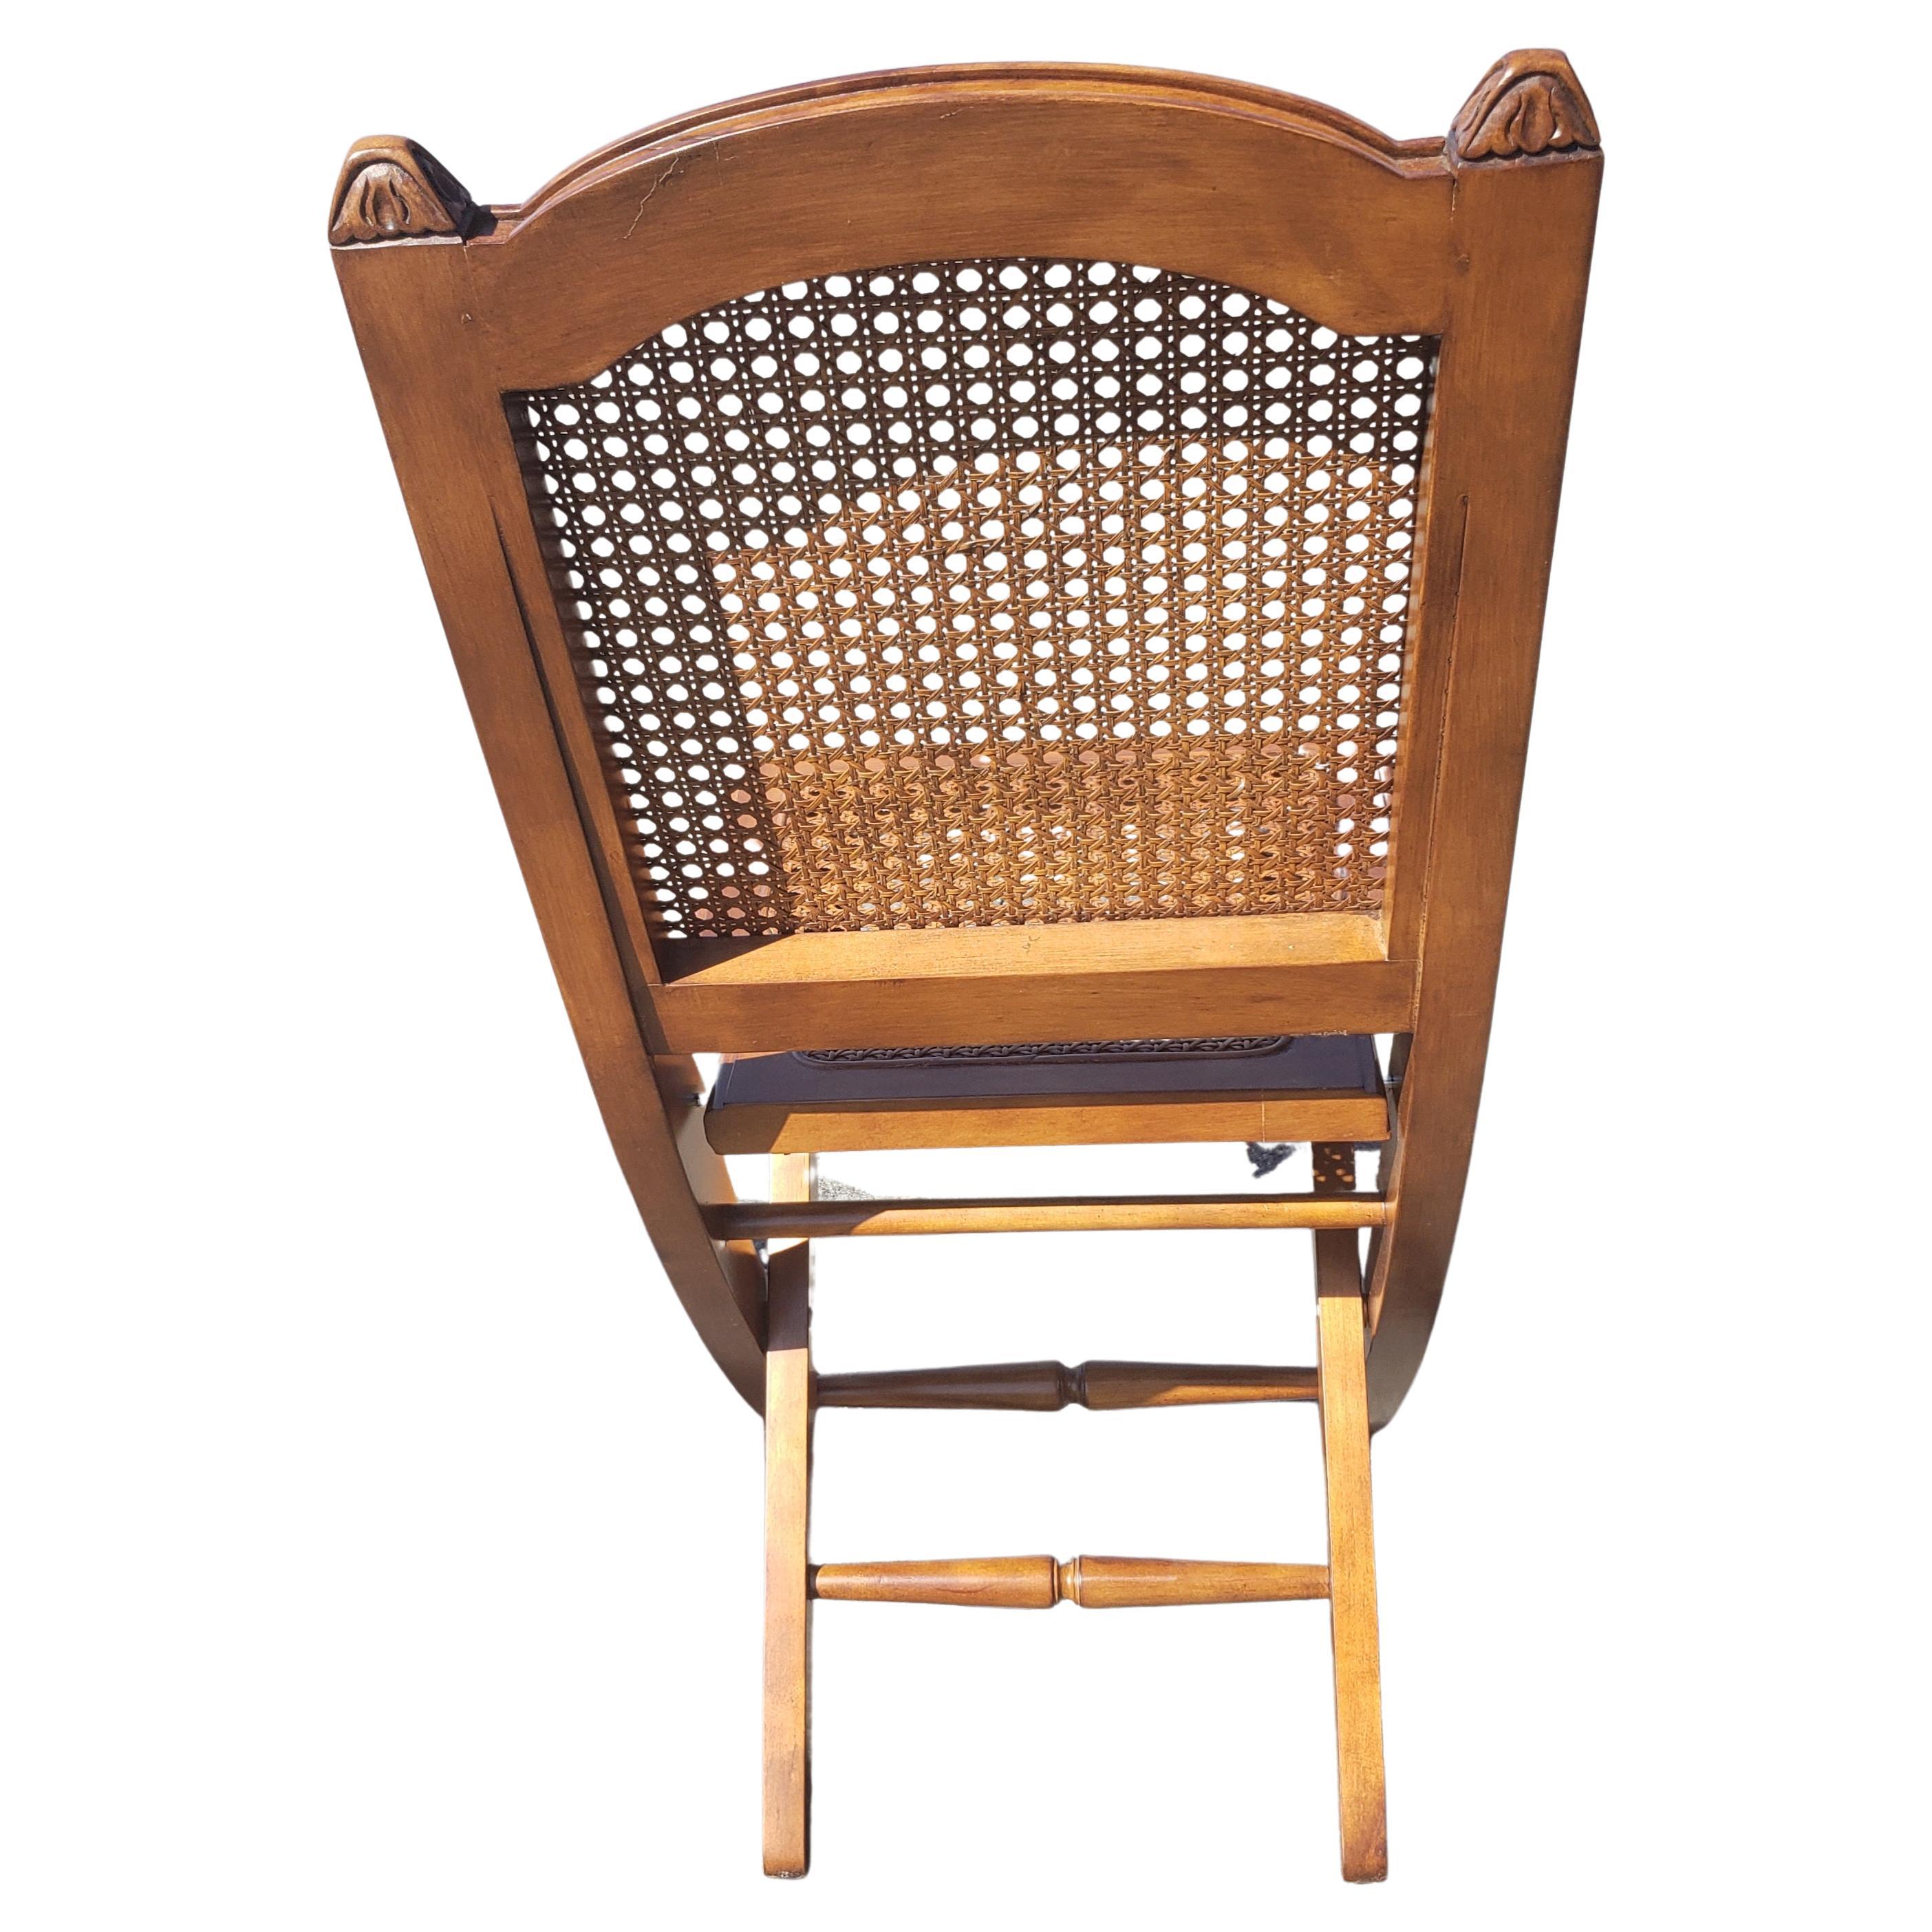 American Solid Cherry and Cane Seat and Back Folding Chairs with Cushions, a Pair For Sale